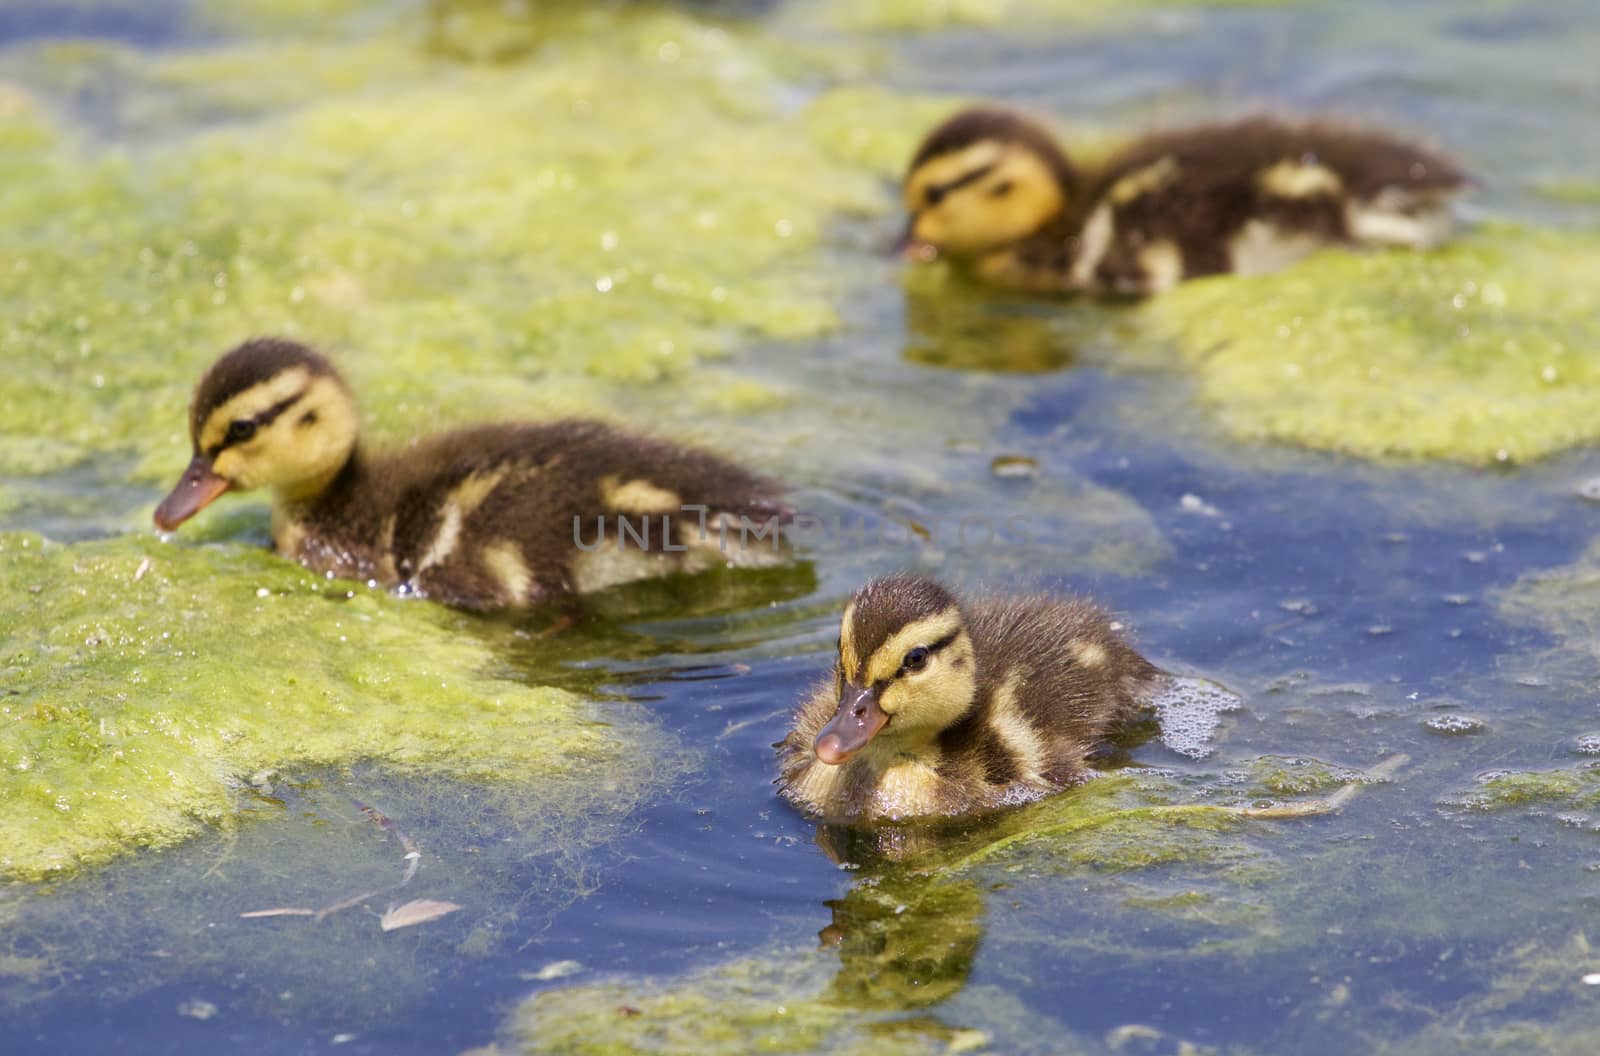 Three cute young ducks together